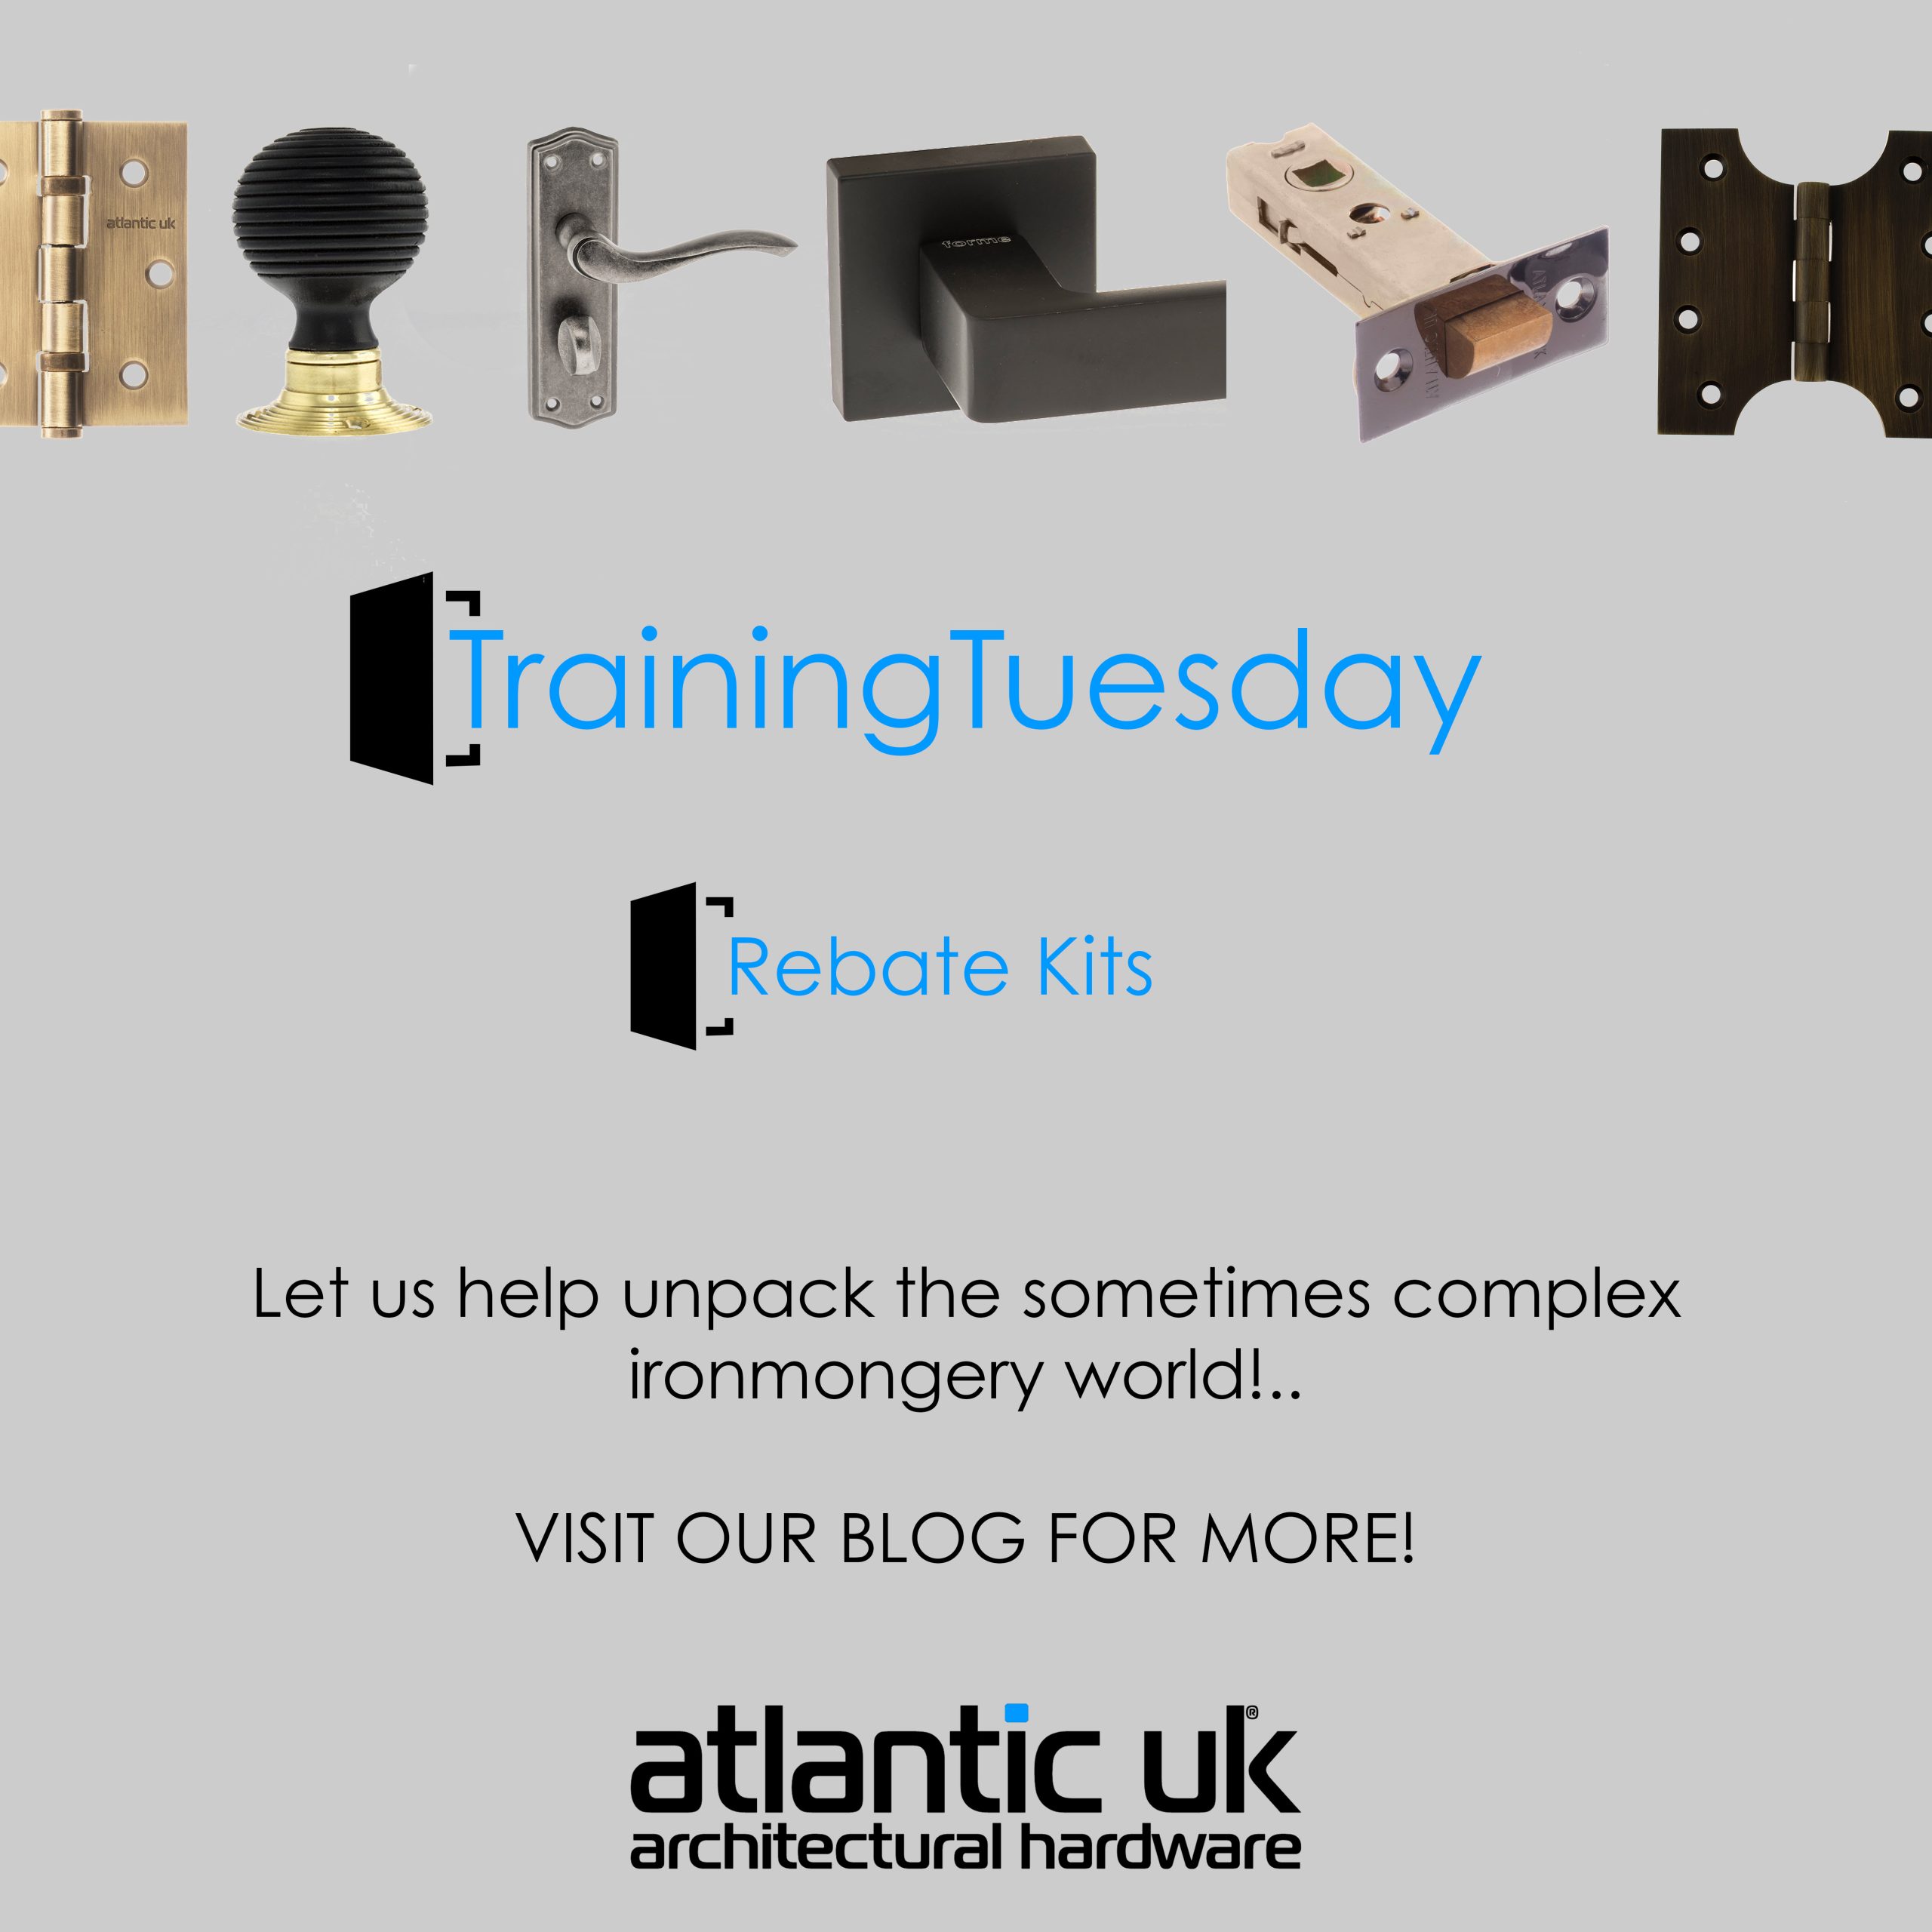 Training Tuesday! What are Rebate Kits? image